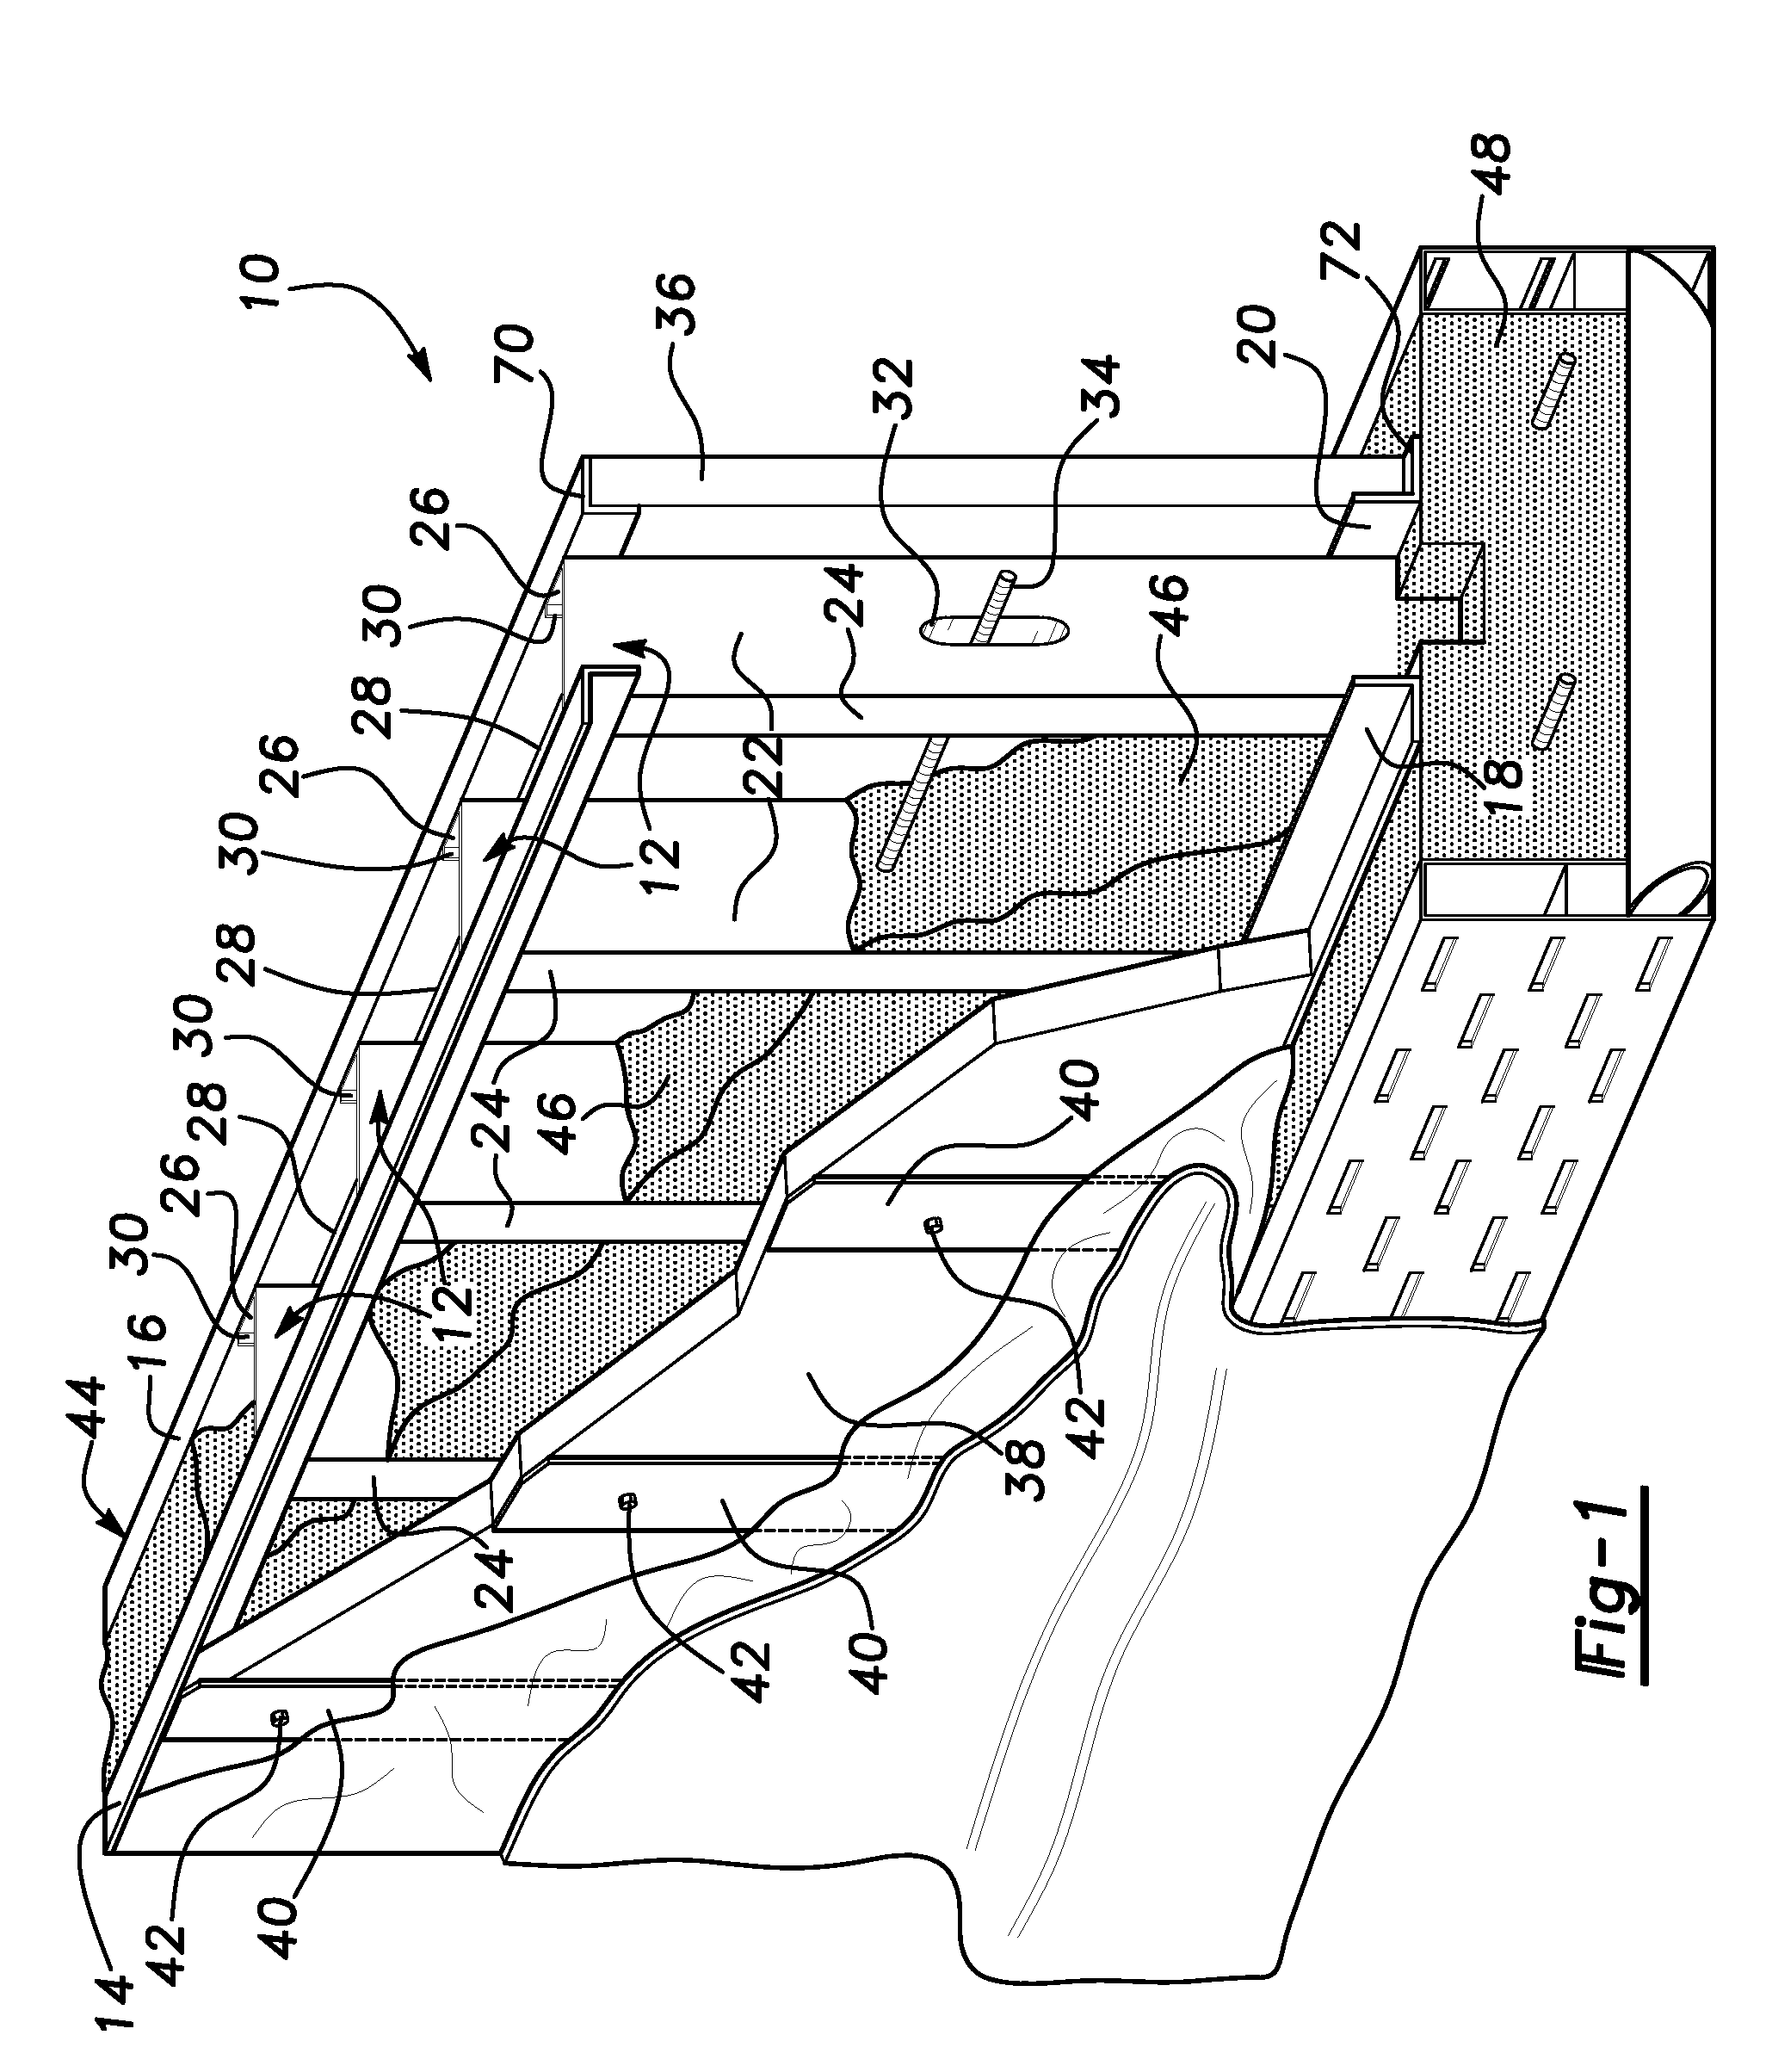 Insulated wall assembly